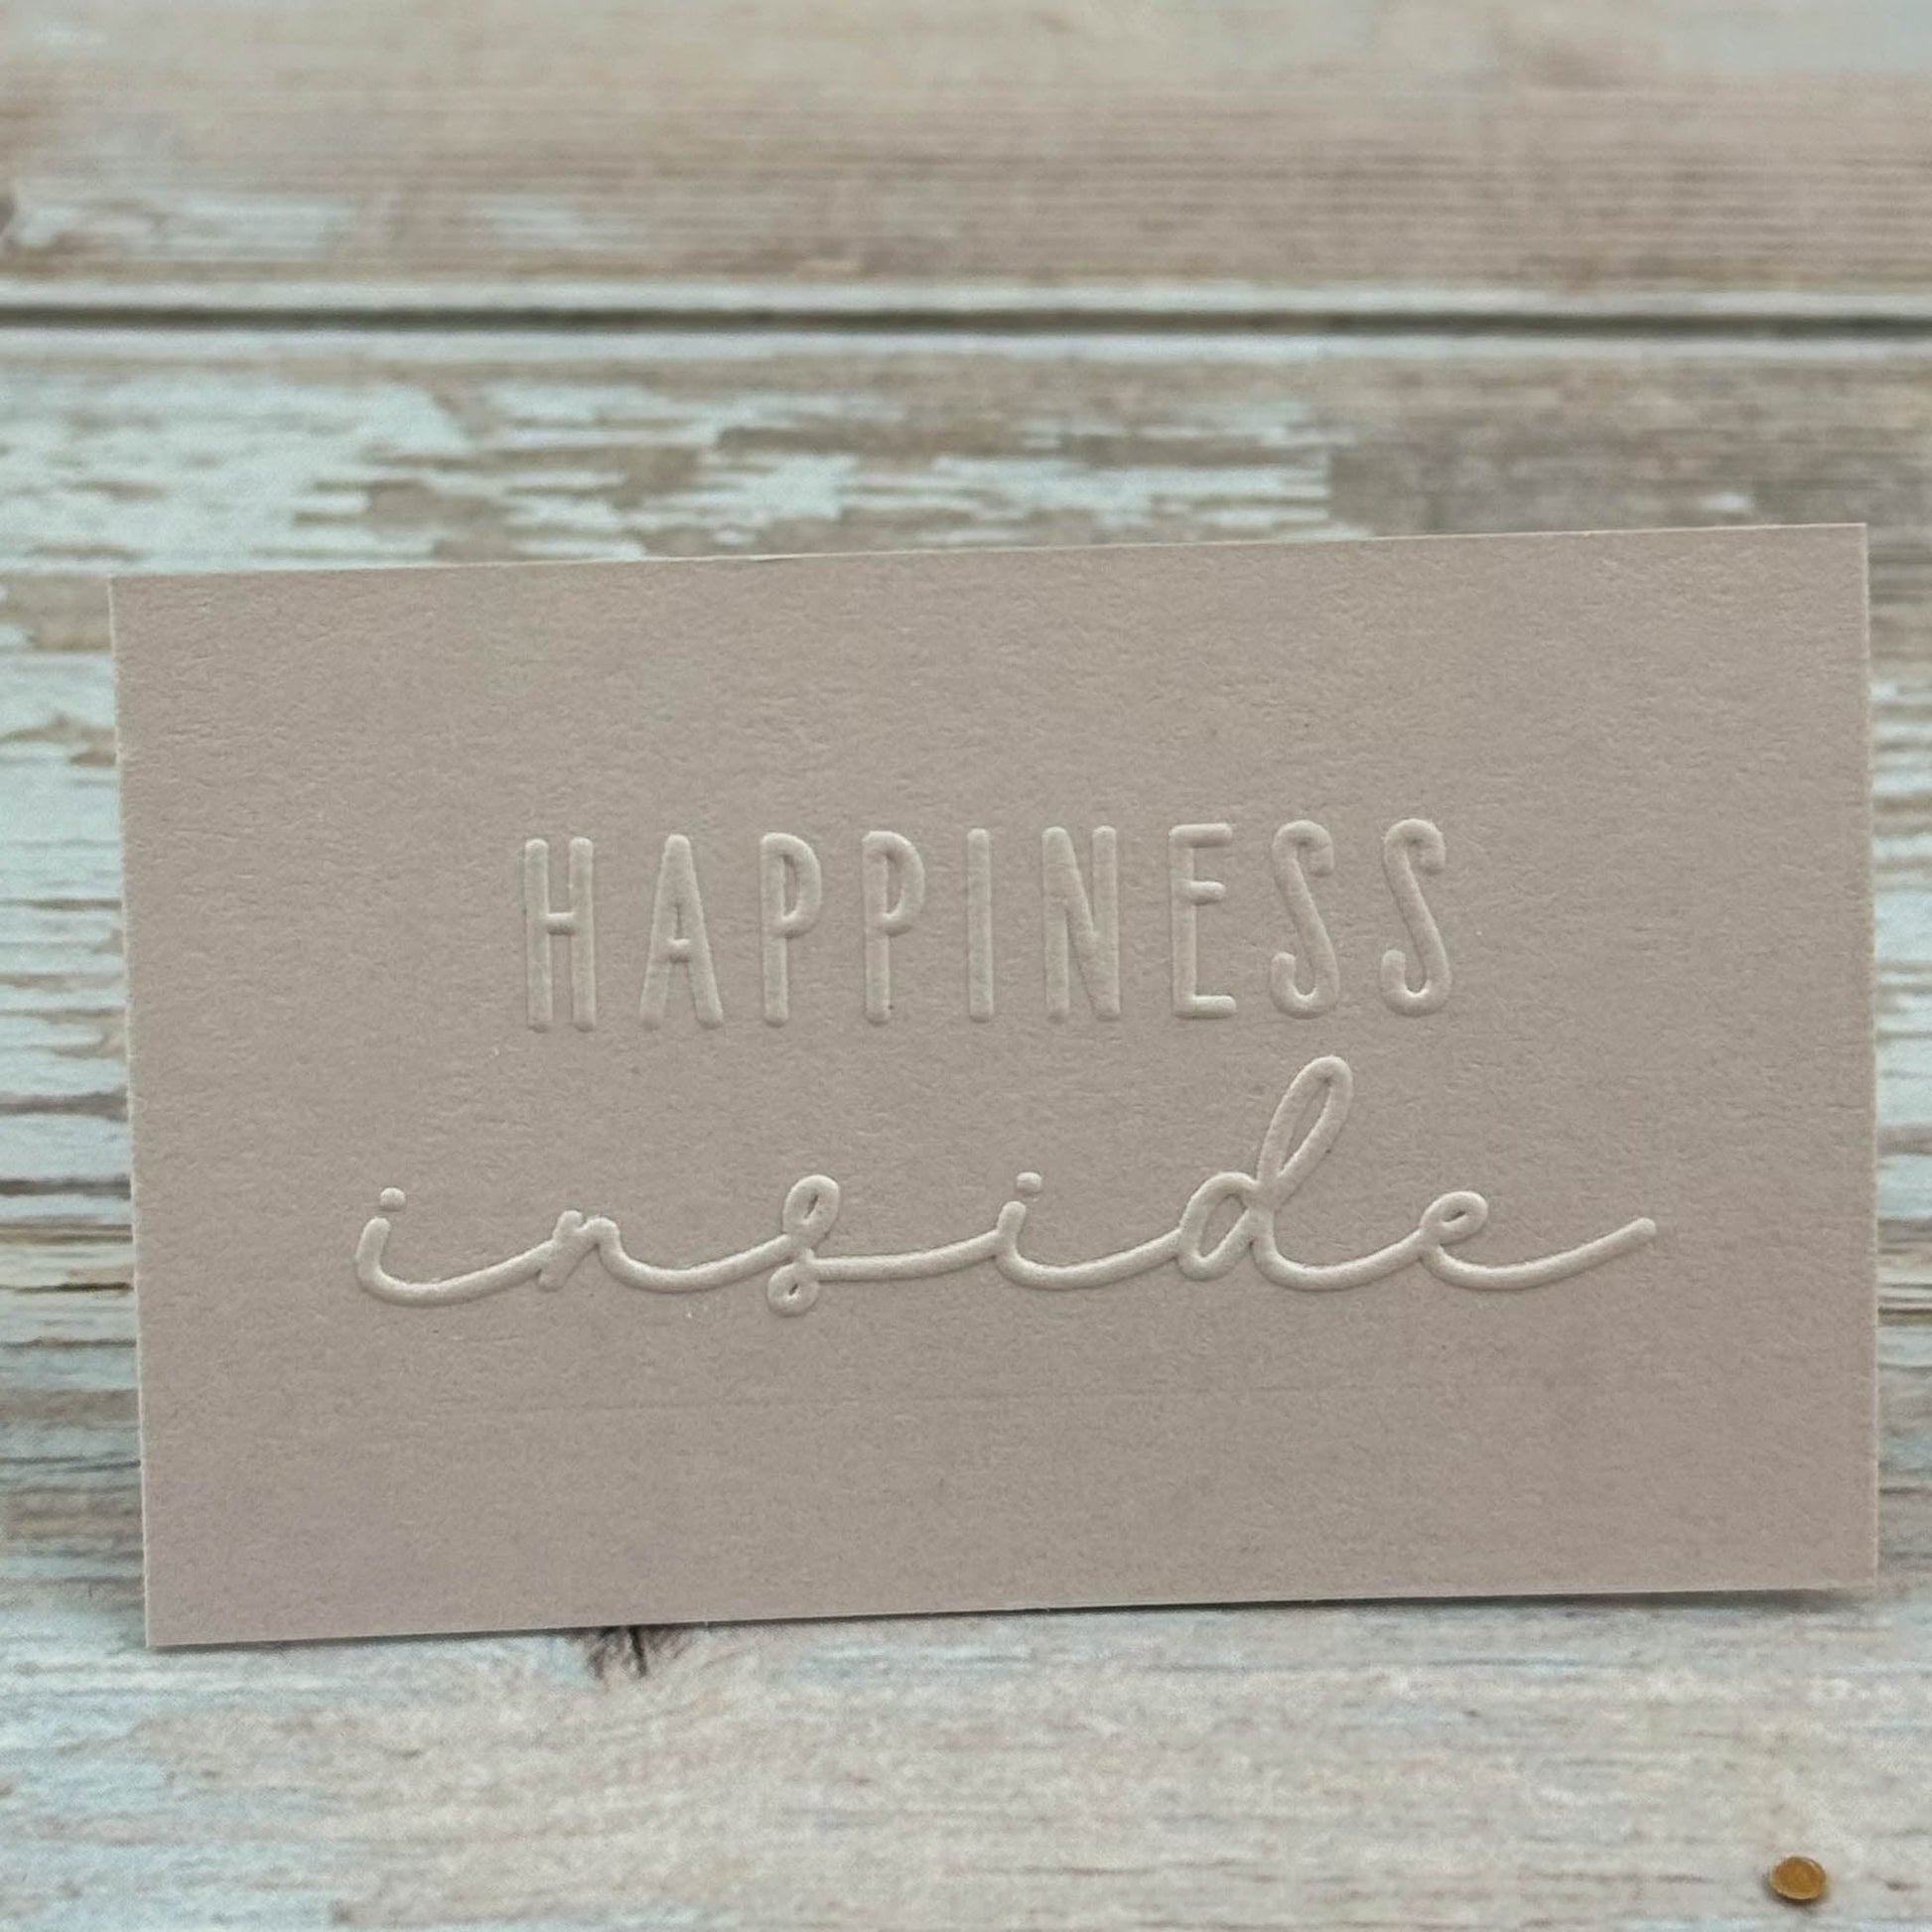 Prägestempel "Happiness inside" - IN LOVE WITH PAPER